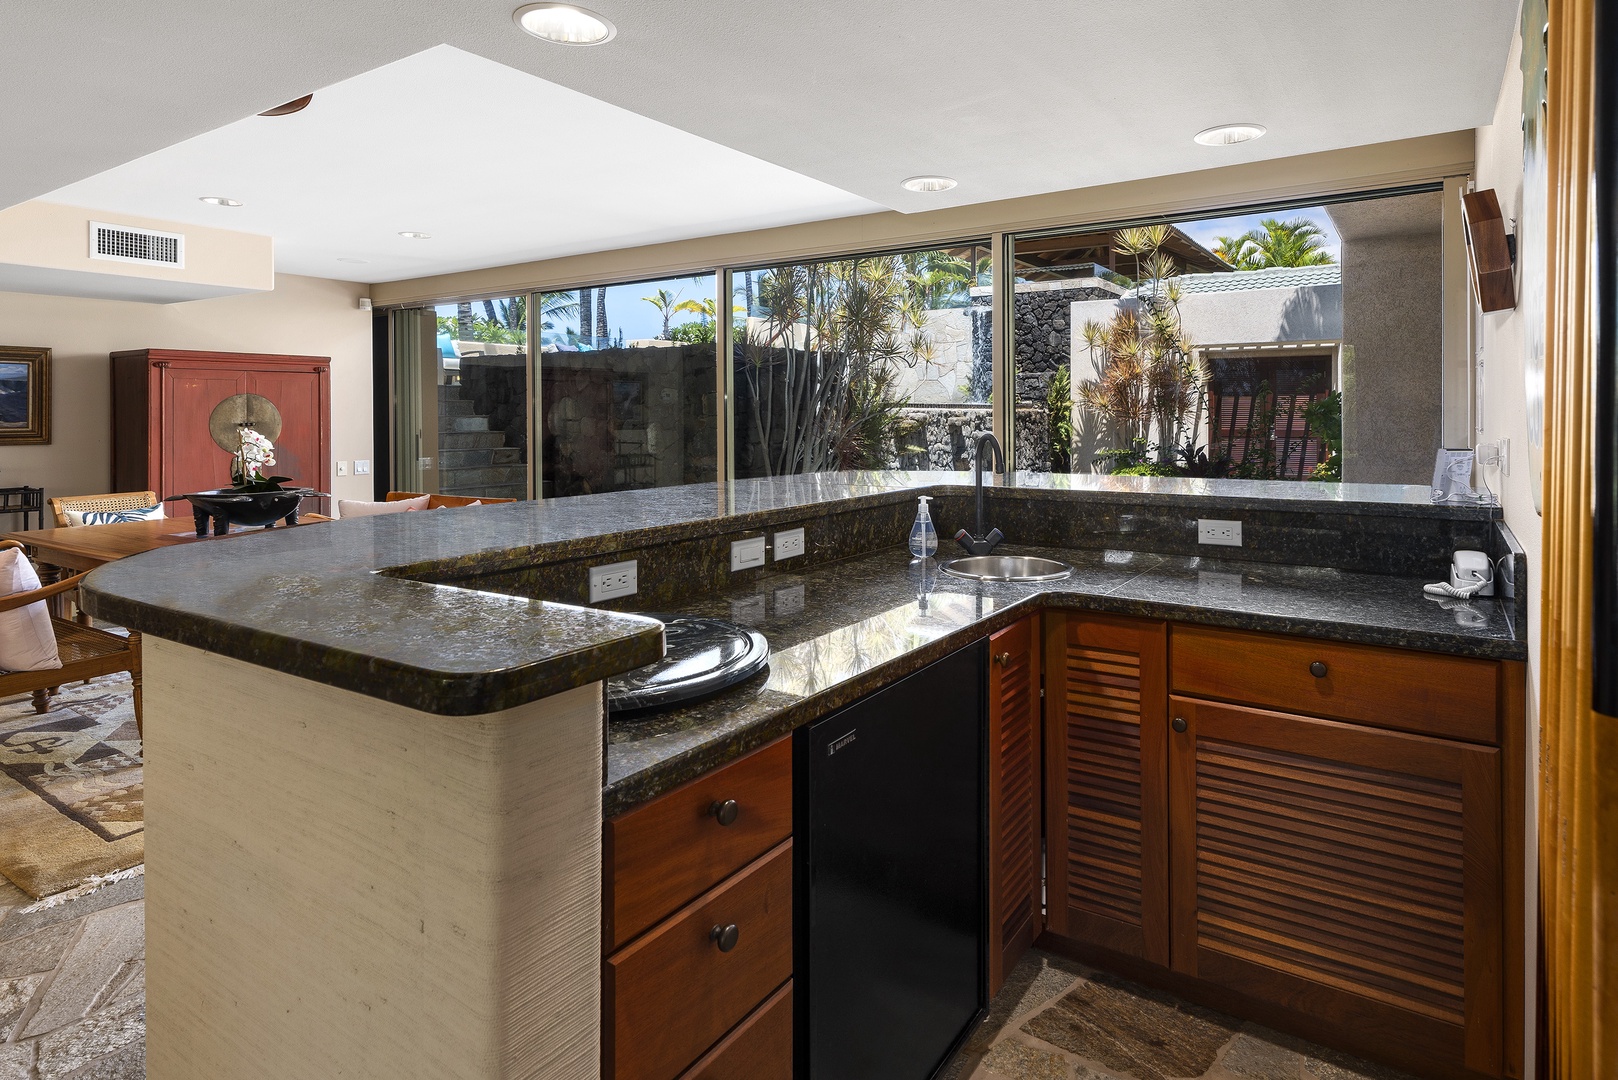 Kamuela Vacation Rentals, Champion Ridge #35 - The bar is equipped with cold storage